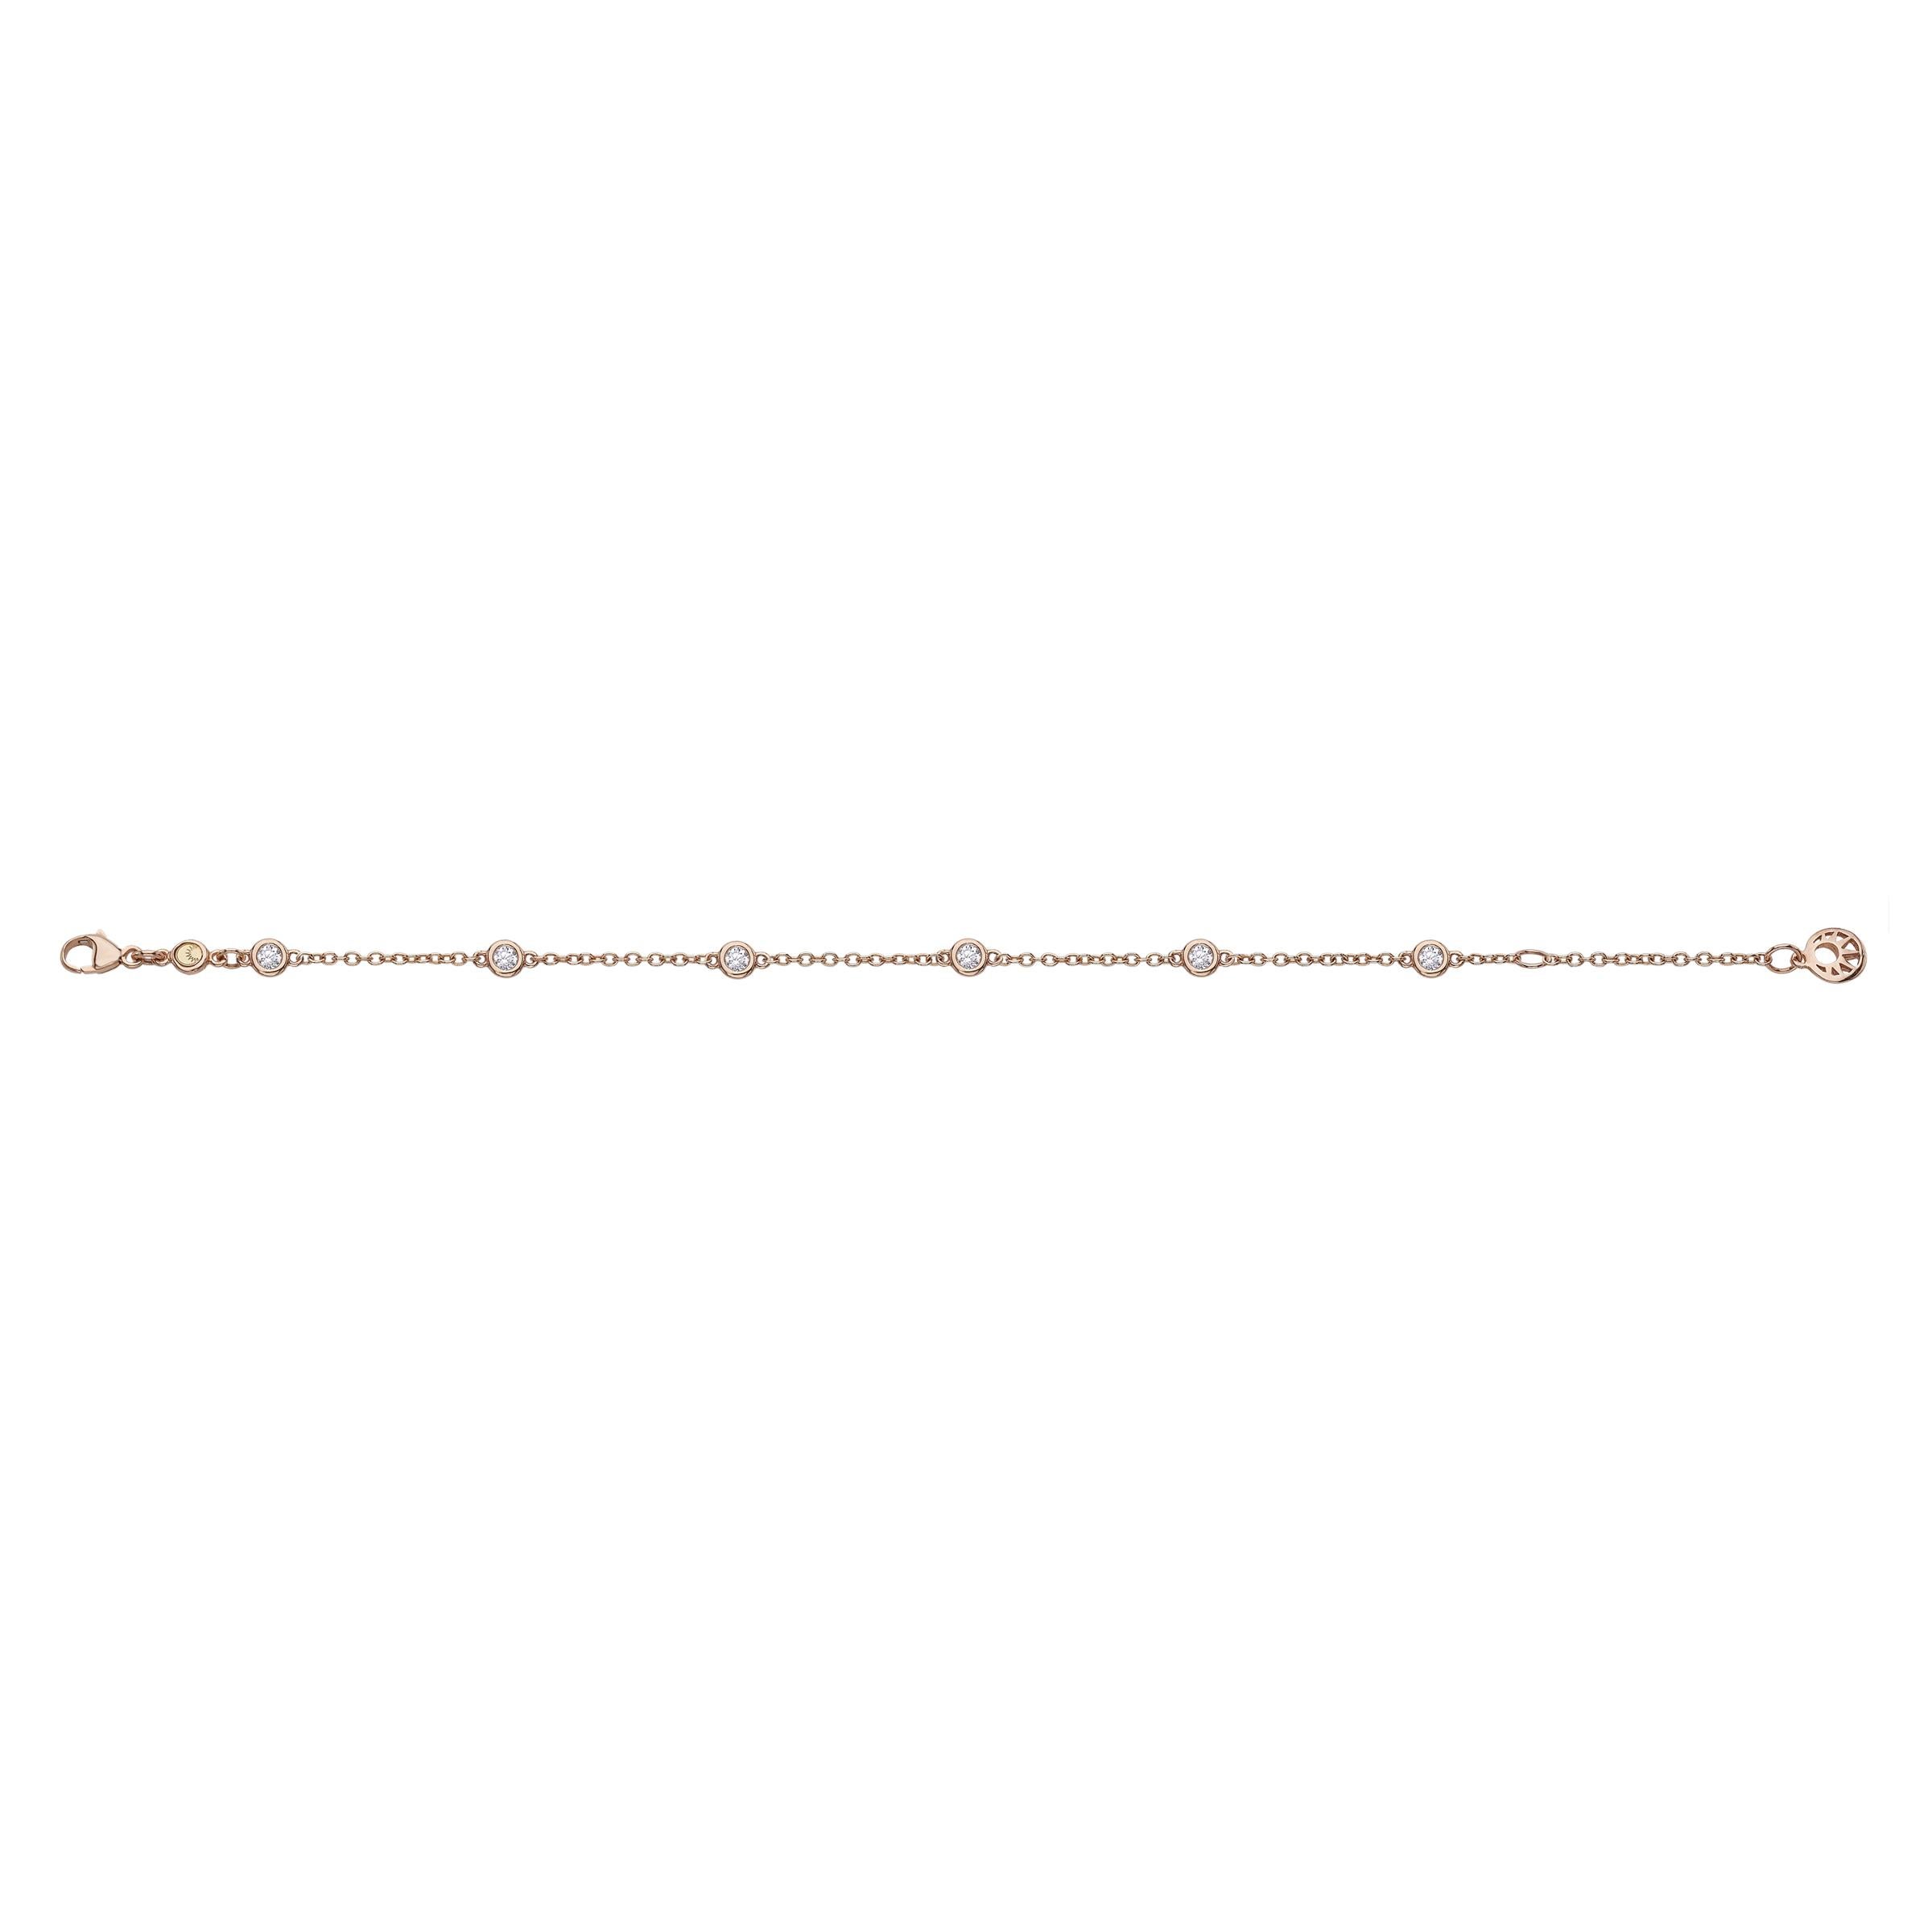 18 Karat Rose Gold Diamond Chain Bracelet featuring 6 round brilliant cut diamonds 0,55 carats total. 18 cm to 16 cm adjustable chain 

This beautiful classic design can be worn as a daywear piece or dressed up for special events such as cocktail